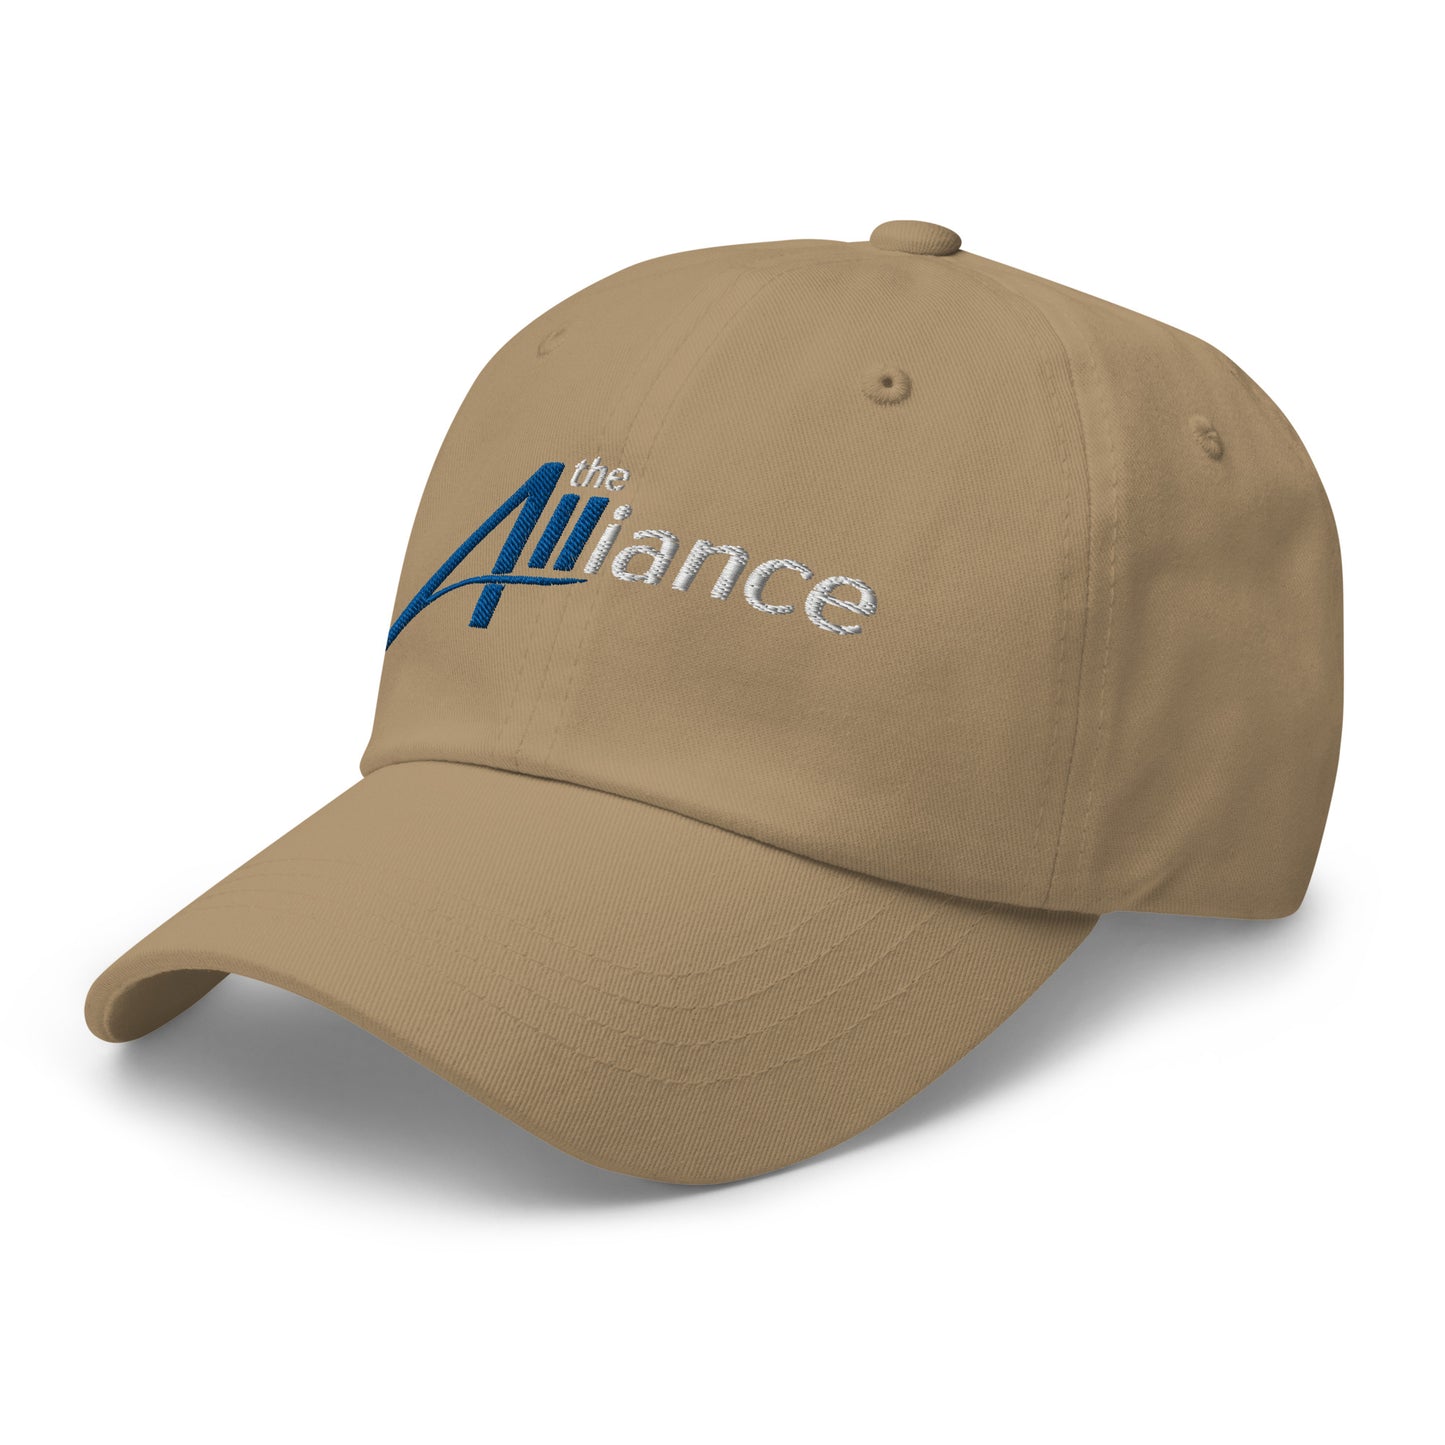 The Alliance - Embroidered Dad hat